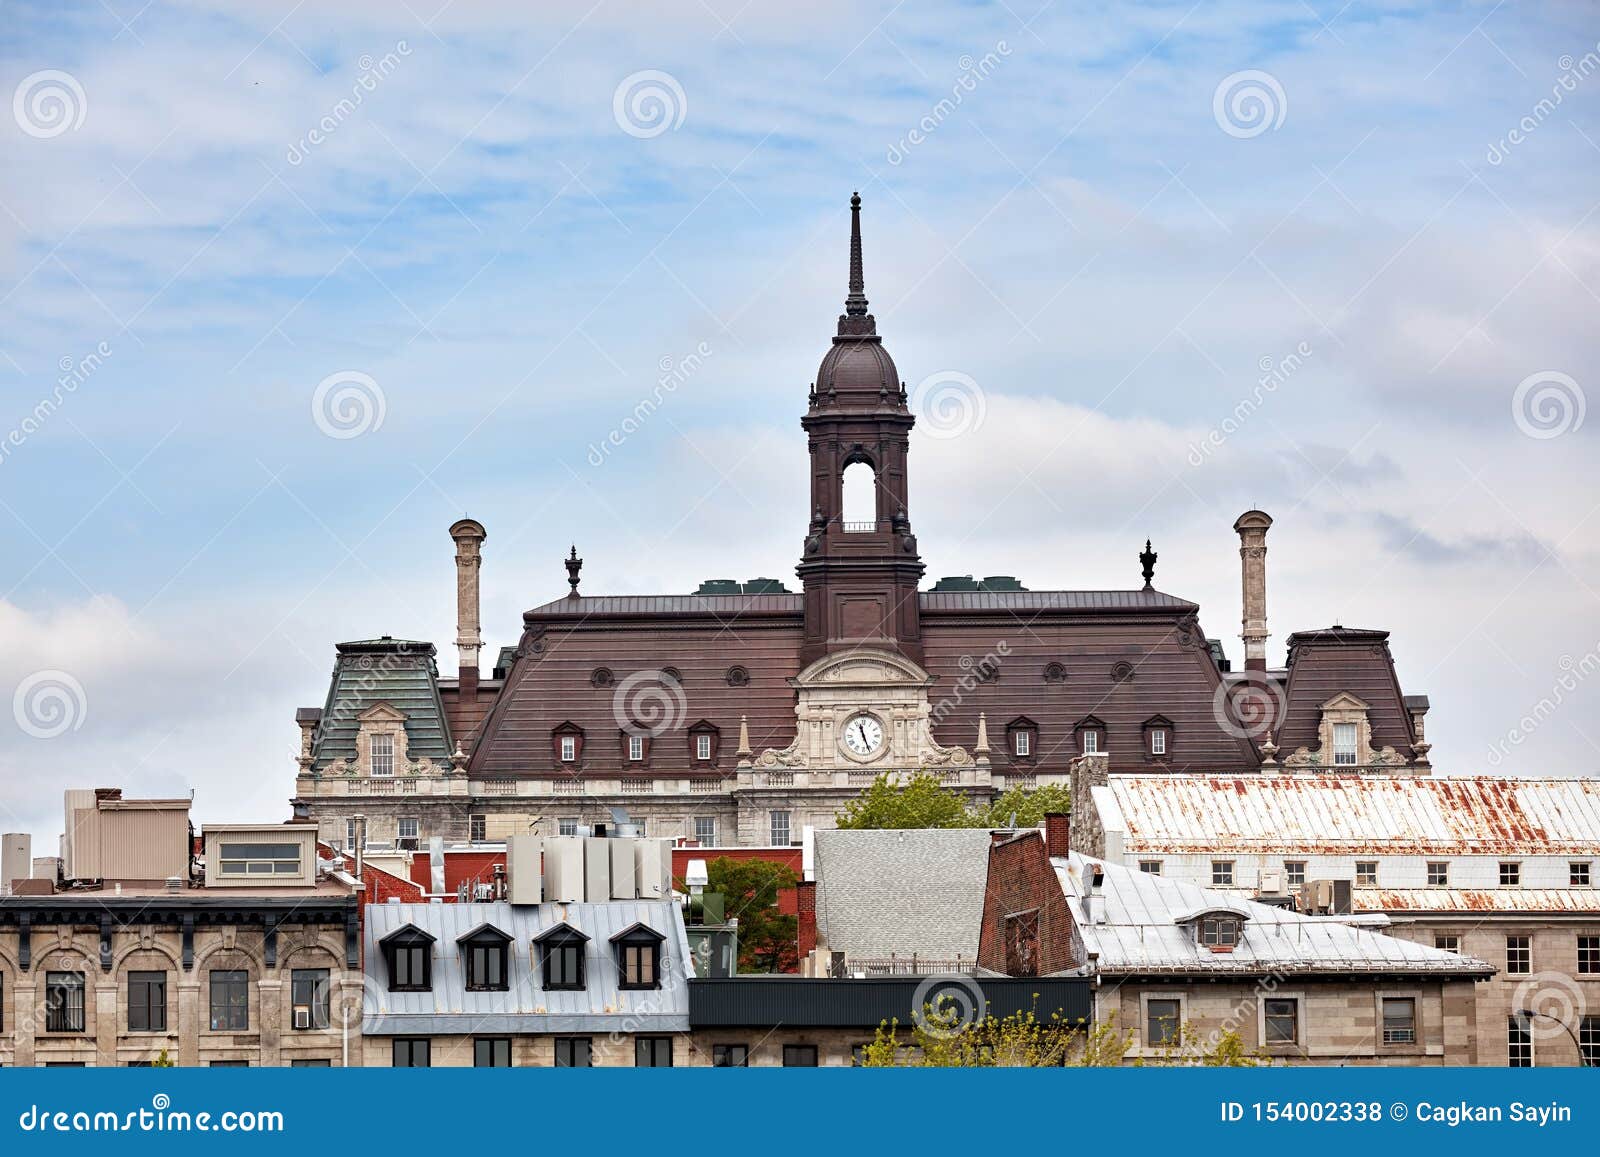 the tower, clock and roof of montreal city hall hotel de ville against bright cloudy sky in old montreal, quebec, canada